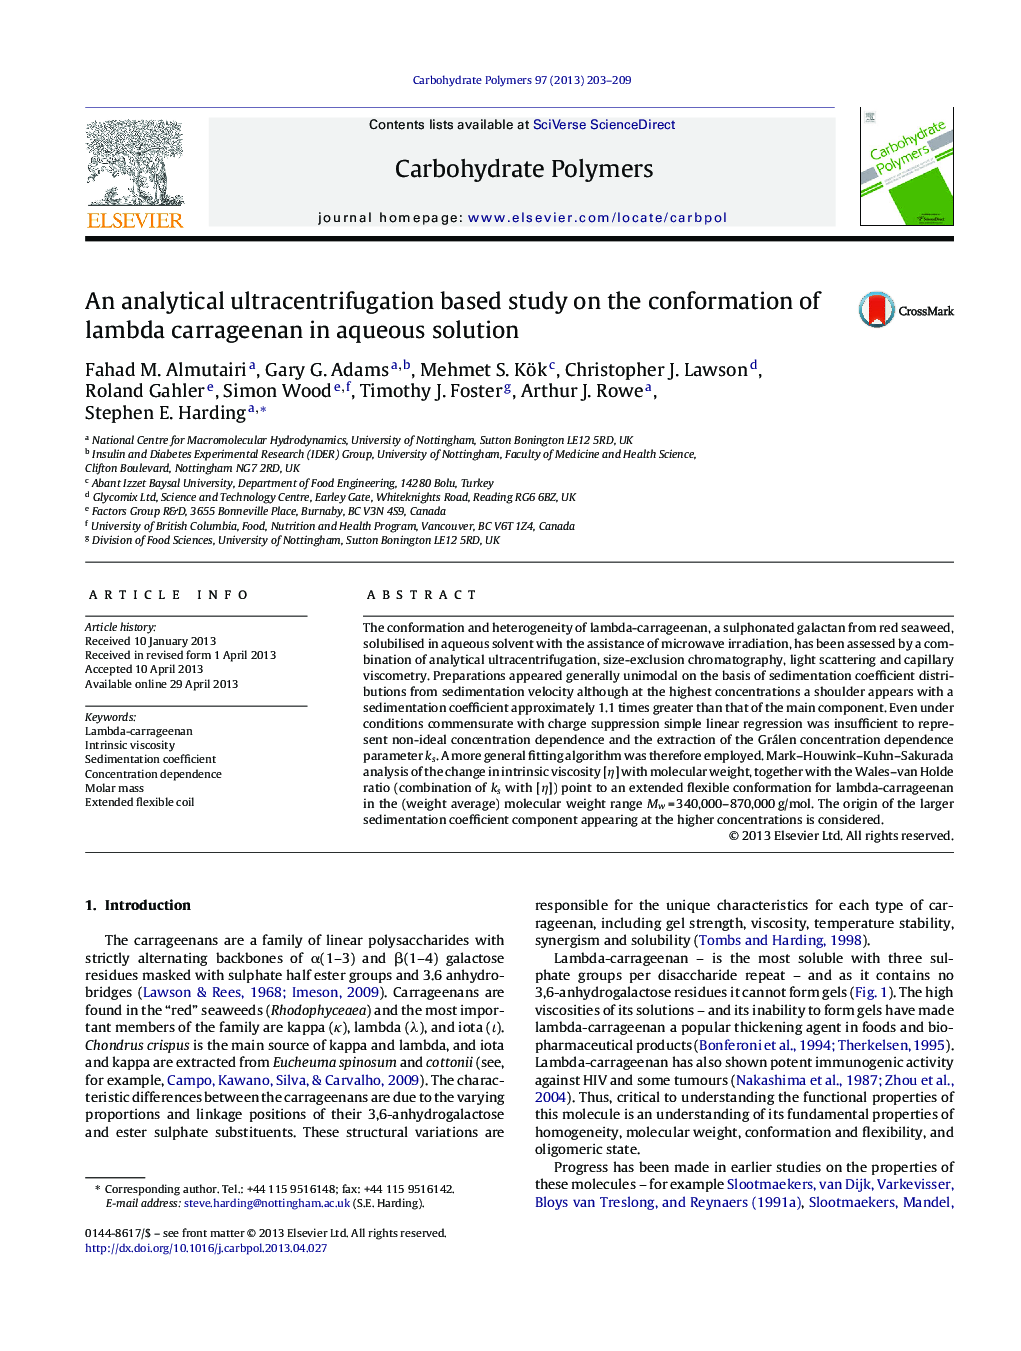 An analytical ultracentrifugation based study on the conformation of lambda carrageenan in aqueous solution